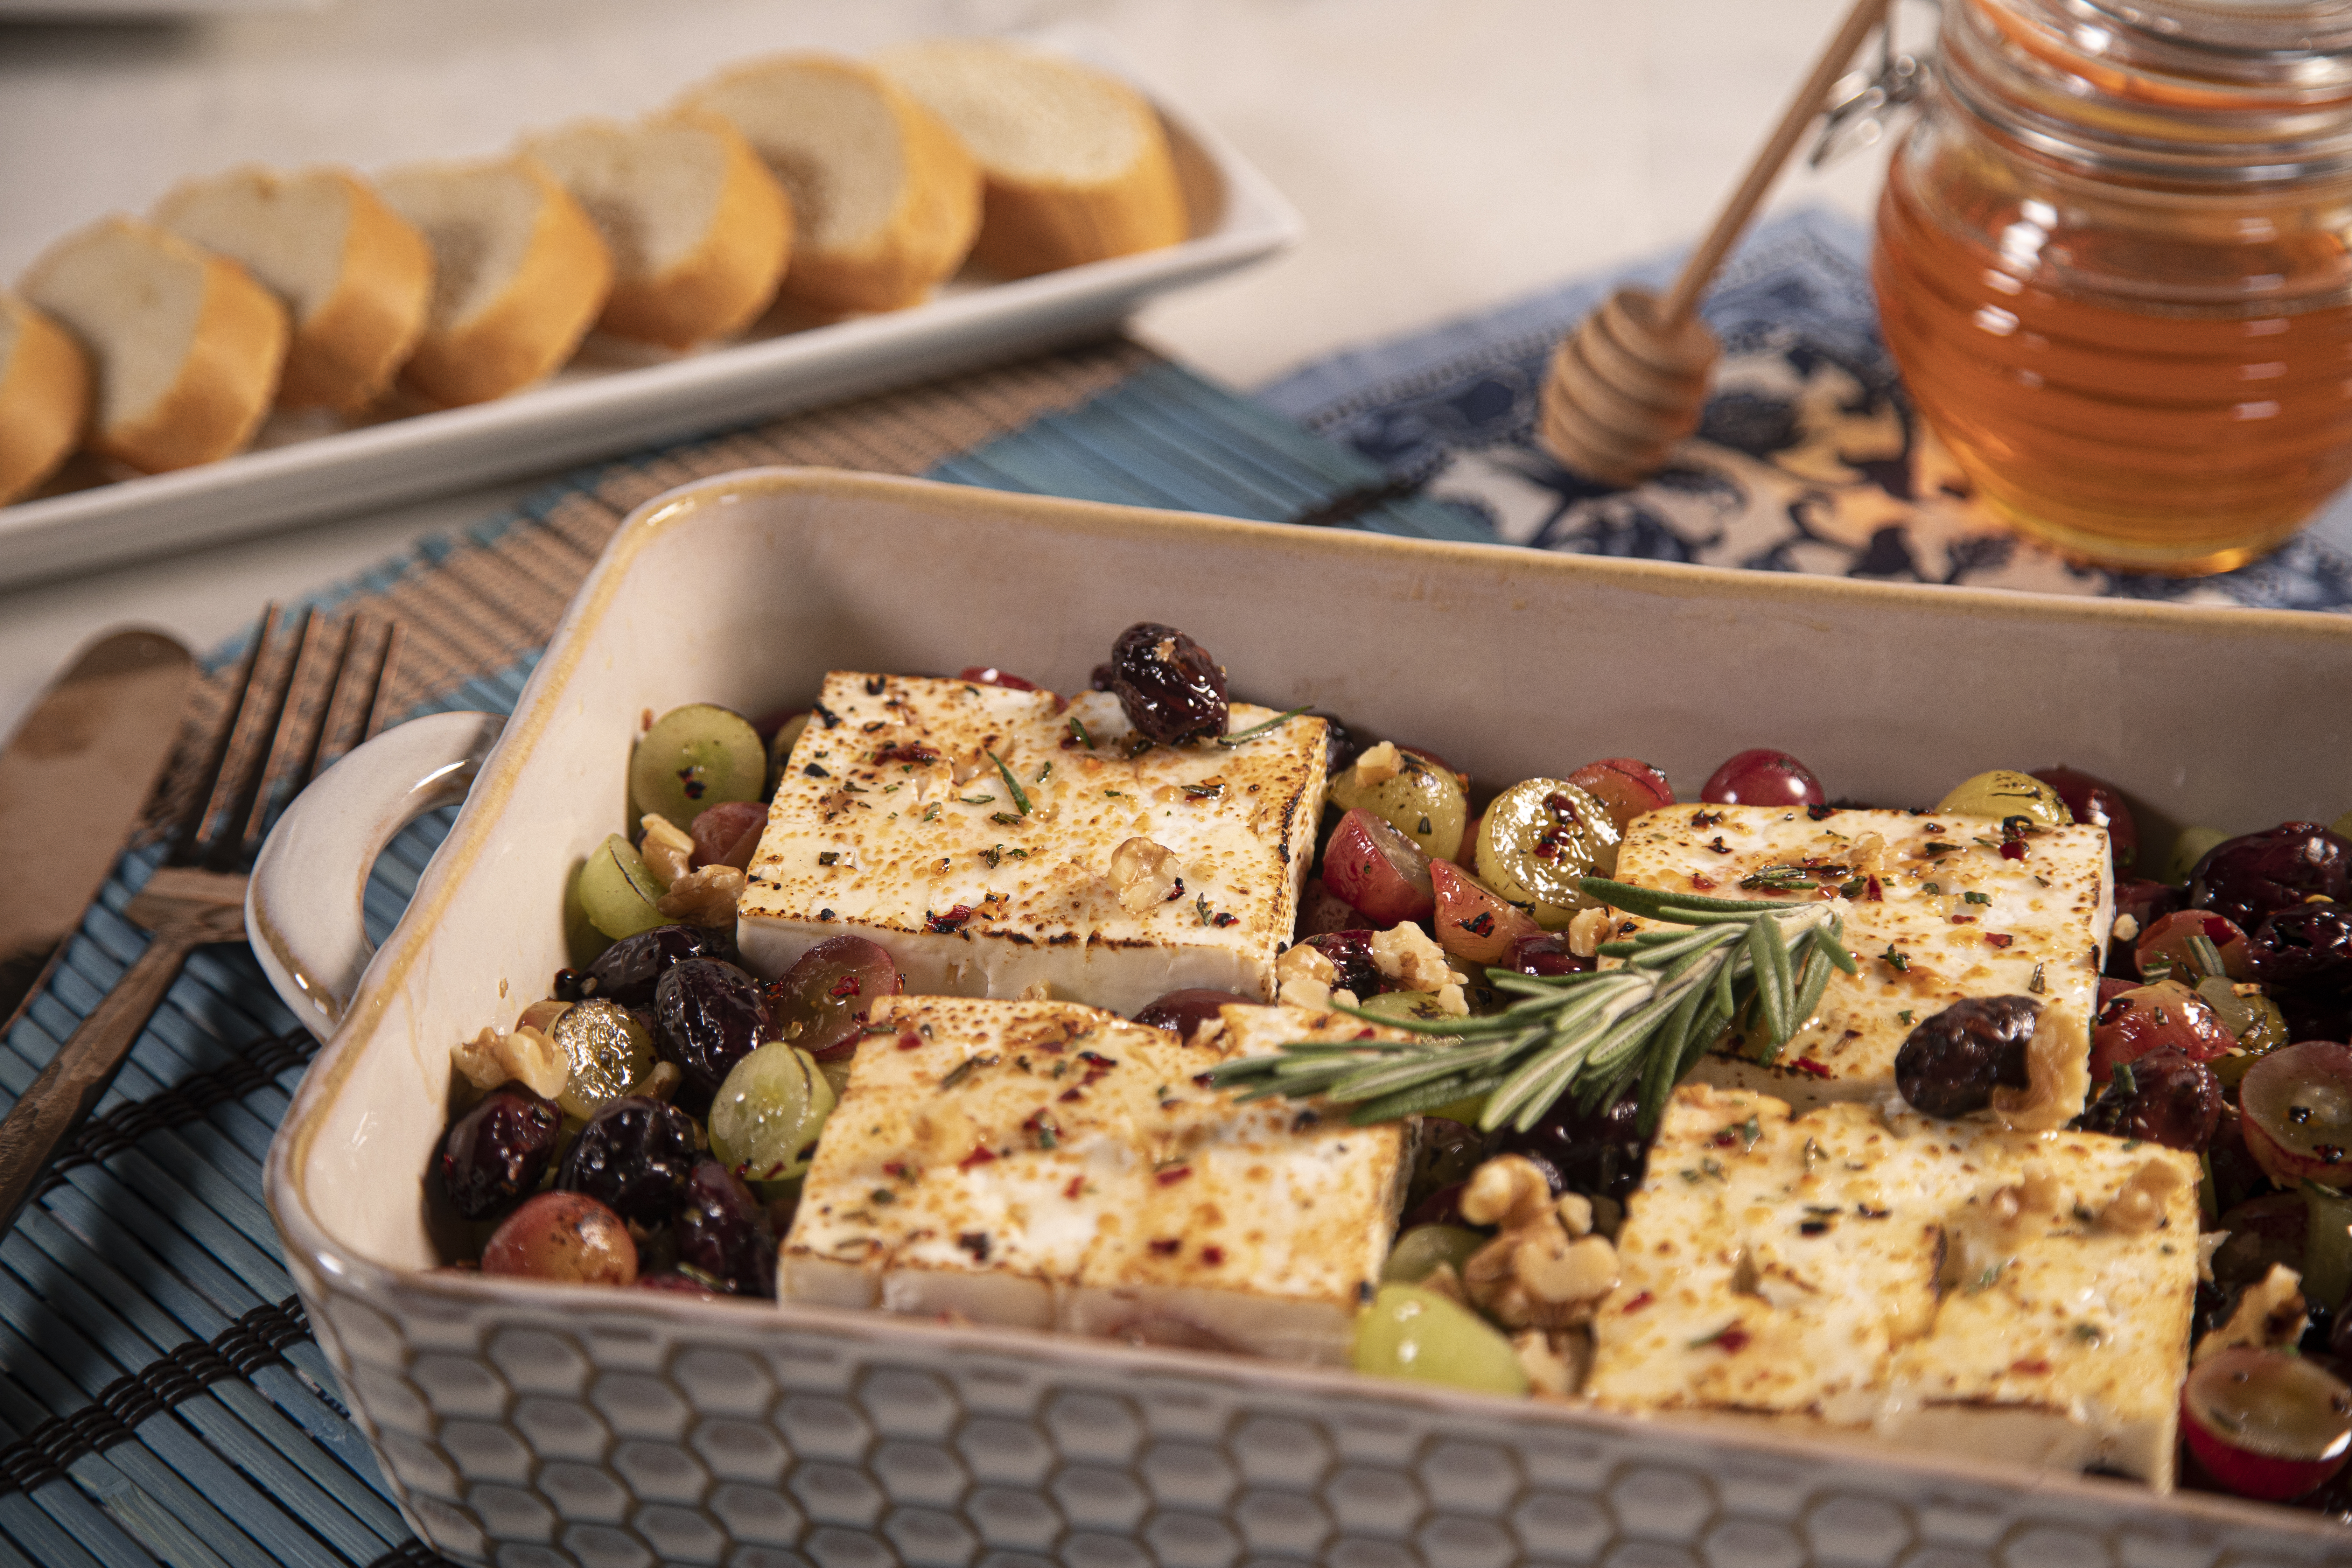 Baked Feta with Grapes, Olives and Honey